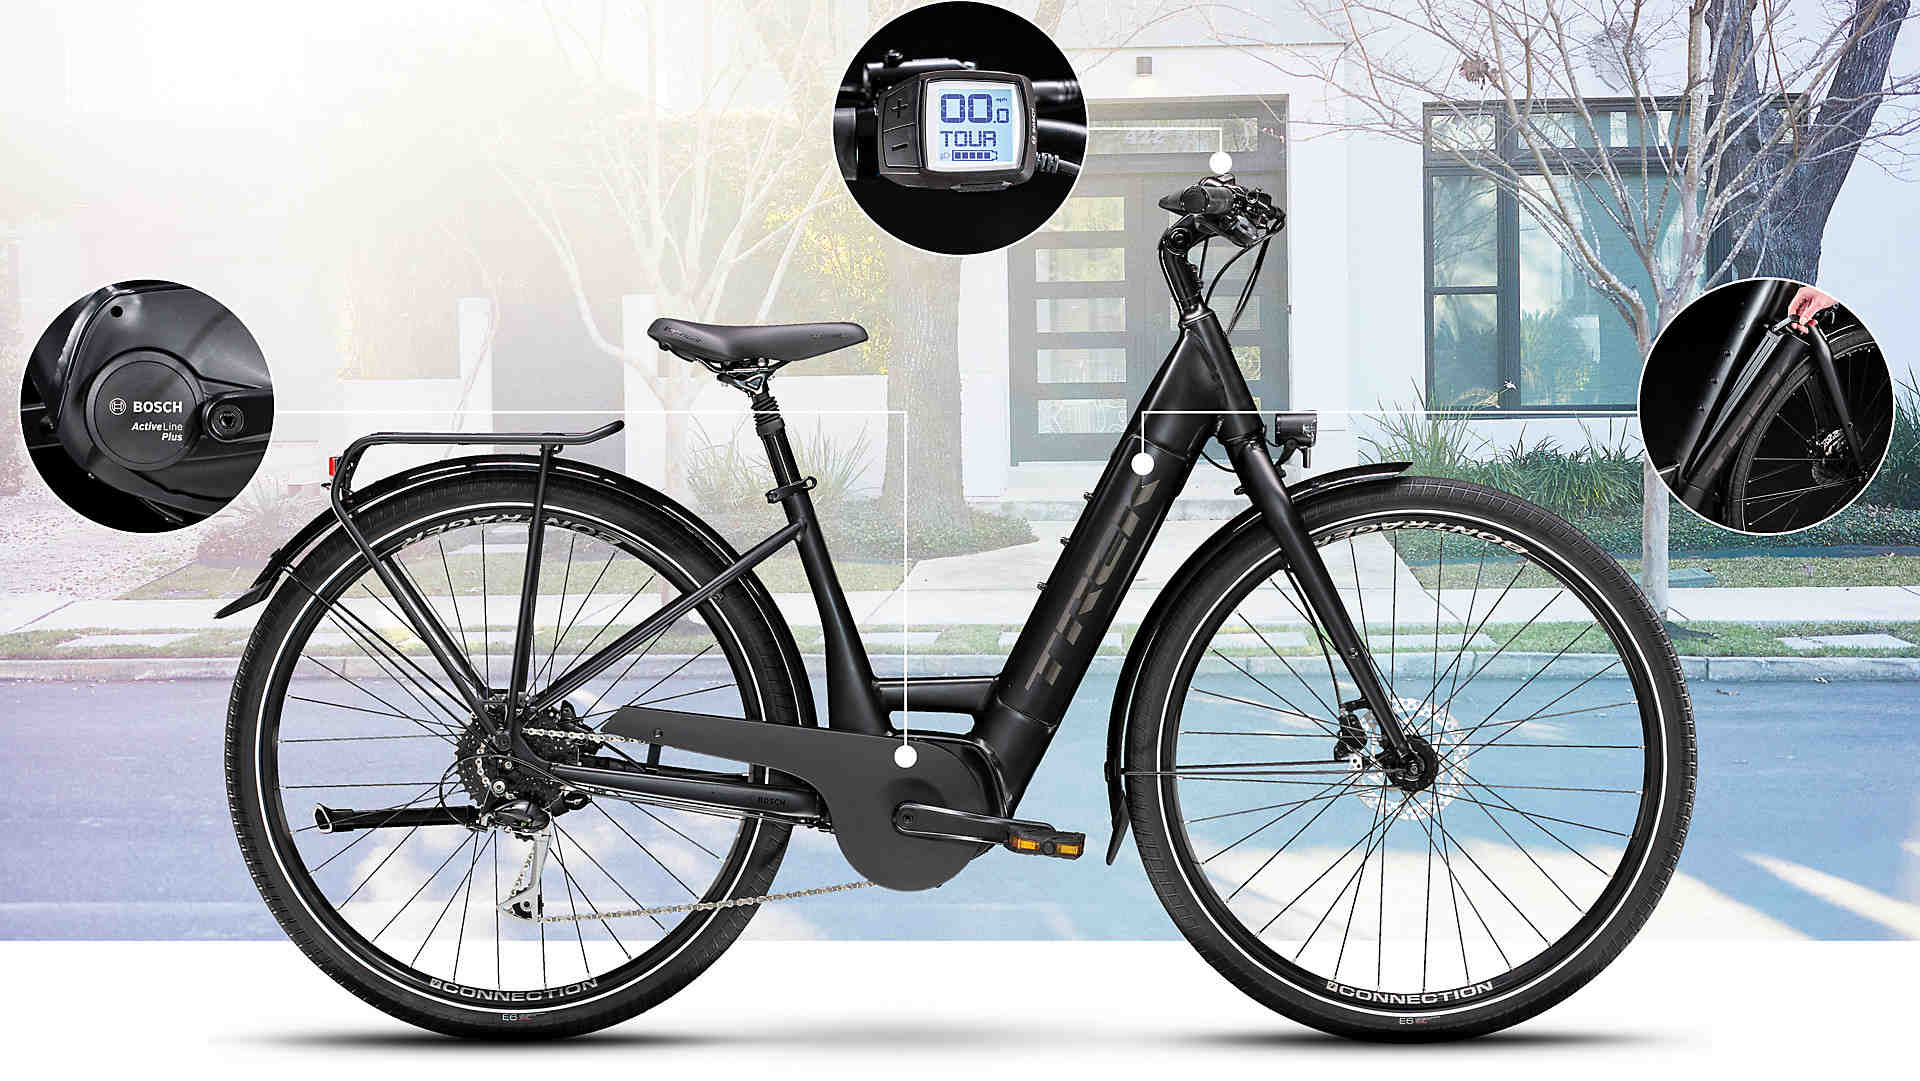 Can you use a car battery for an electric bike?